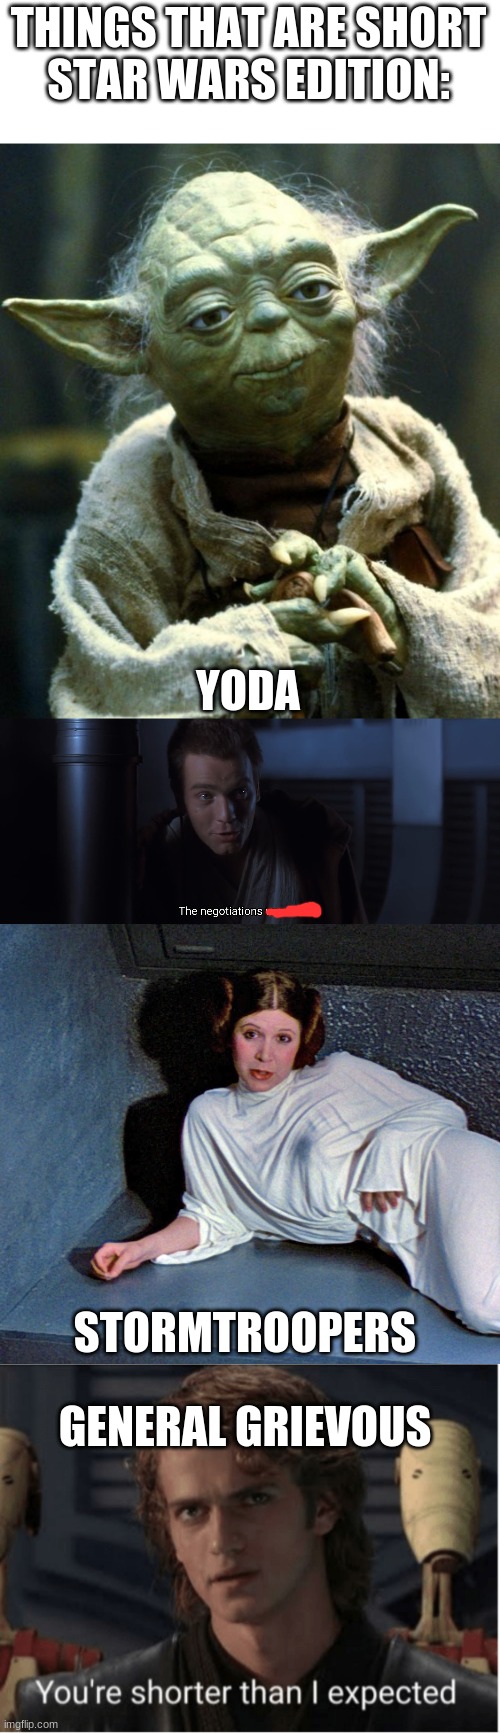 short star wars | THINGS THAT ARE SHORT
STAR WARS EDITION:; YODA; STORMTROOPERS; GENERAL GRIEVOUS | image tagged in memes,star wars yoda,the negotiations were short,star wars leia short for a stormtrooper,youre shorter than i expected,star wars | made w/ Imgflip meme maker